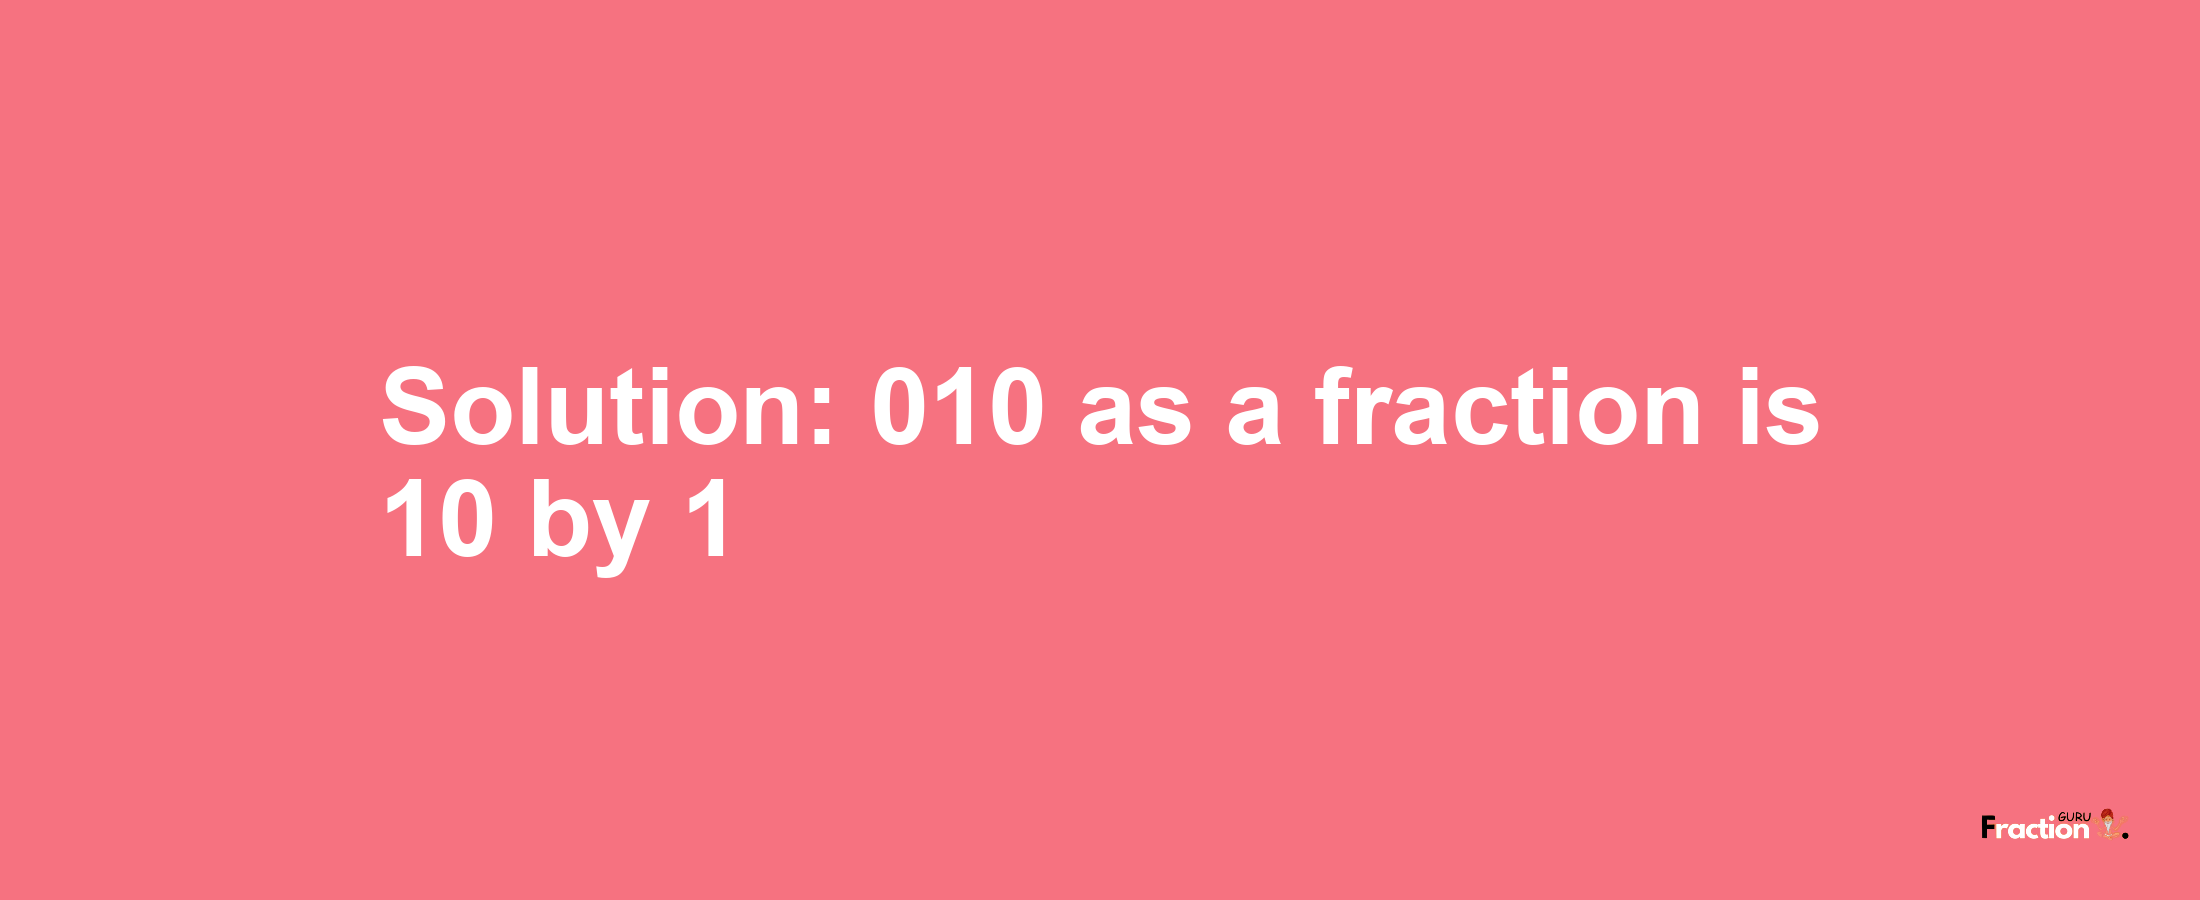 Solution:010 as a fraction is 10/1